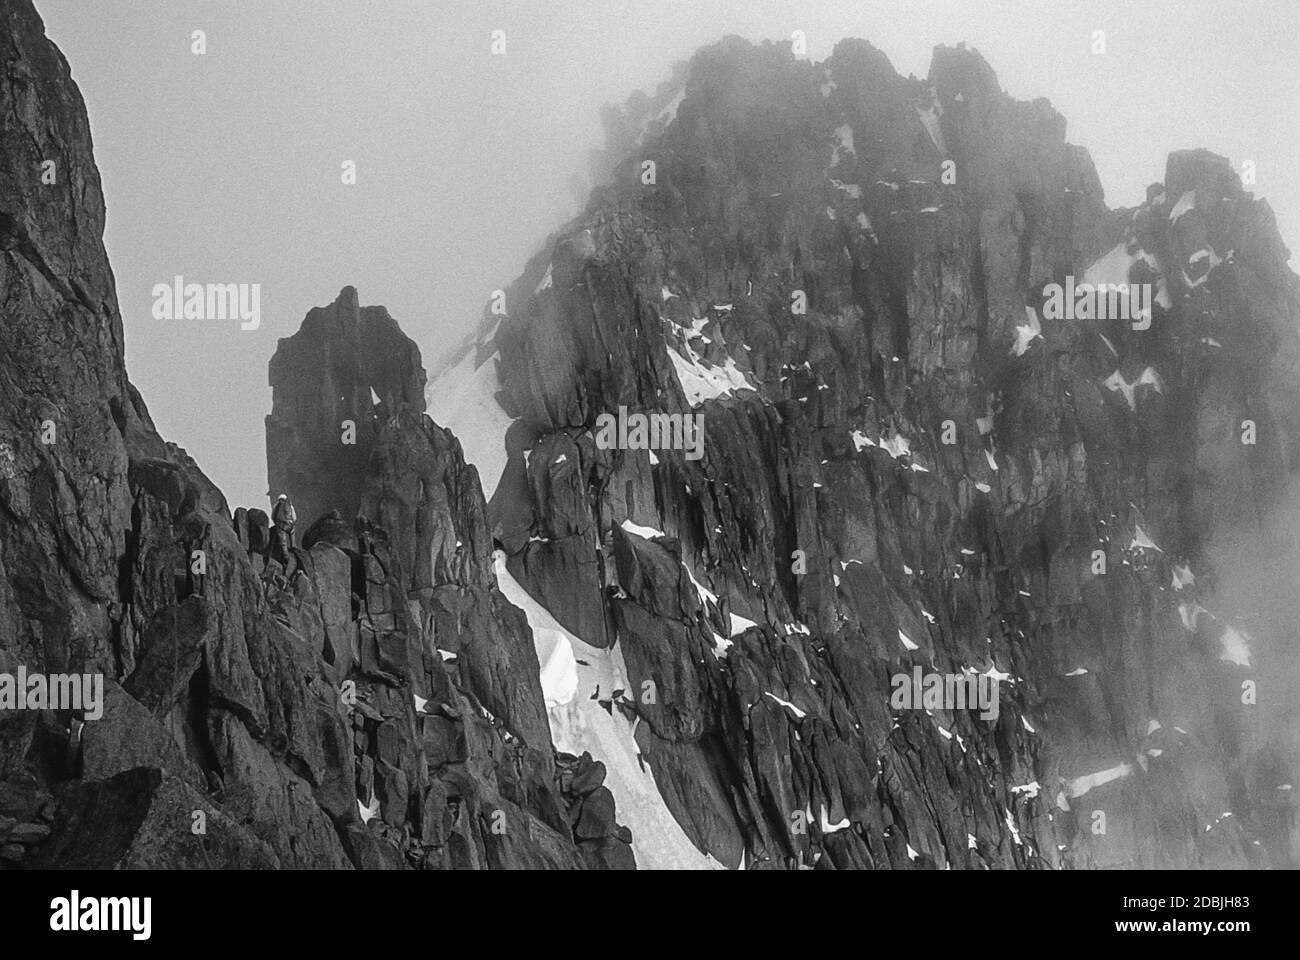 Kenya. This is mountaineering on Mount Kenya the highest mountain in Kenya as it was in 1976/77 shown here crossing the Gates of Mists between the twin peaks of Batian 17,058ft; 5199m on the left and Nelion 17,022ft; 5188m in the cloud on the right. Beyond the gap of the Gates of Mists is the head of the Diamond Couloir. Stock Photo